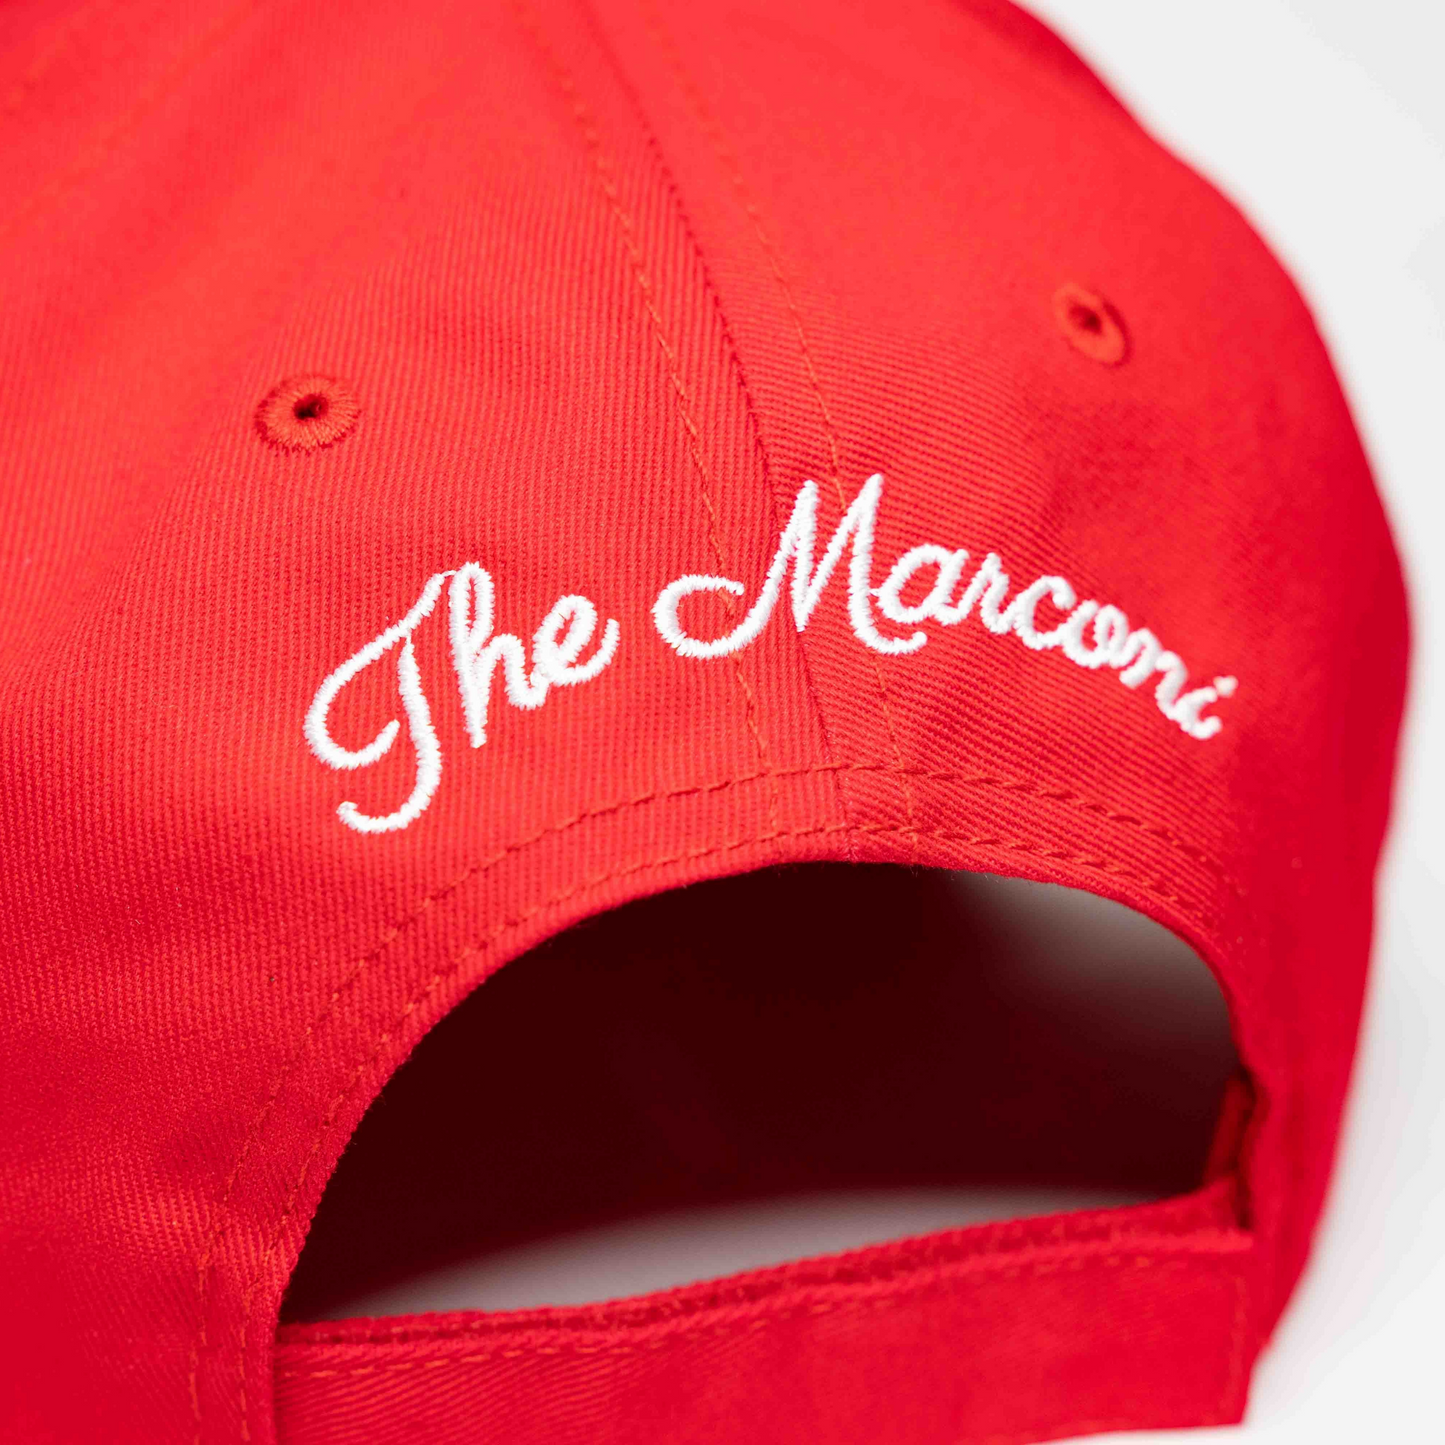 NEW - Iconic "Marconi Horse" Hat - Red